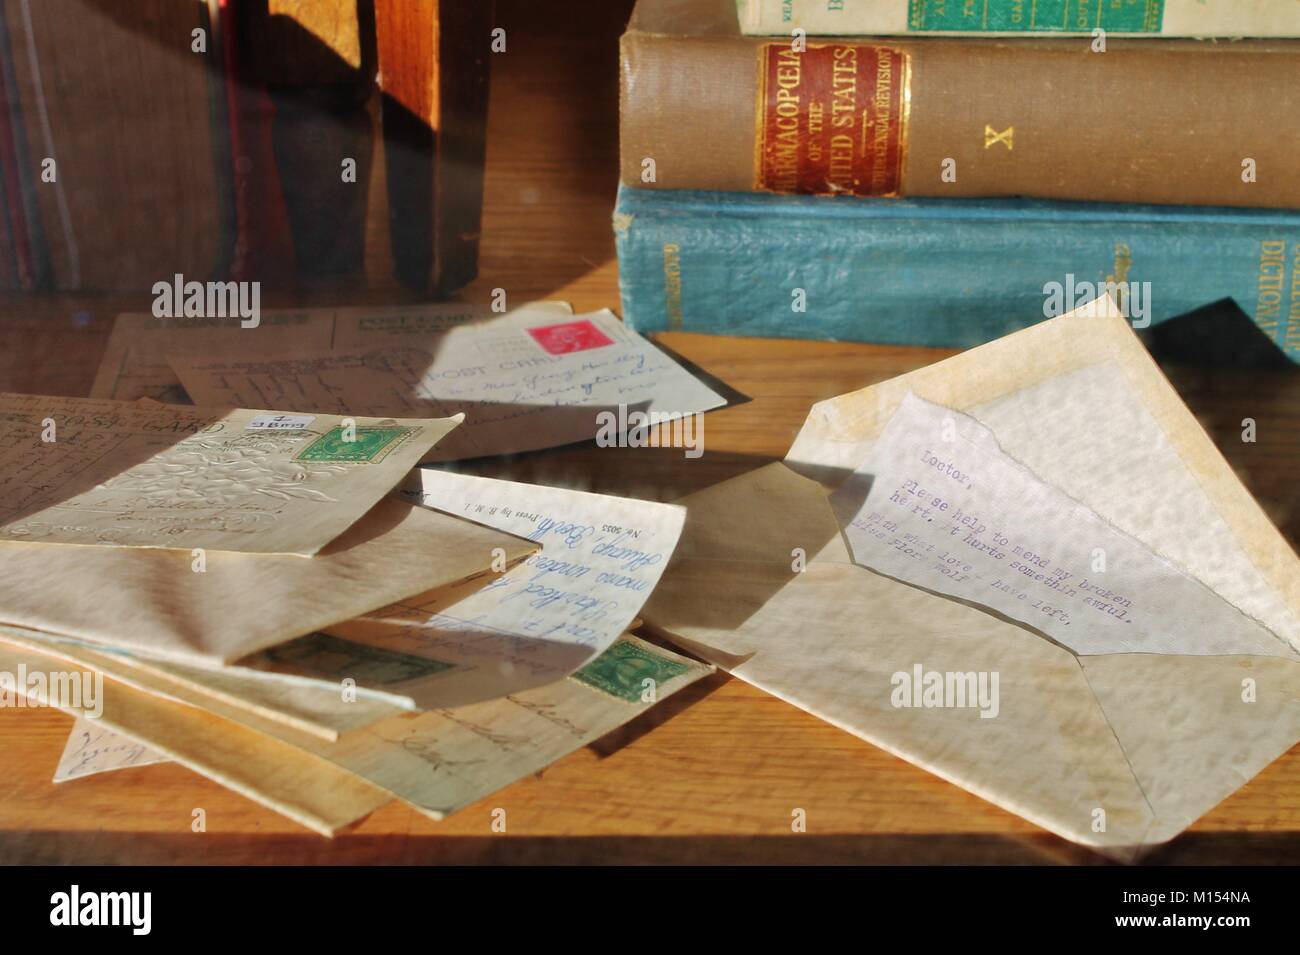 pile of old stamped letters and envelopes with antique books in background Stock Photo